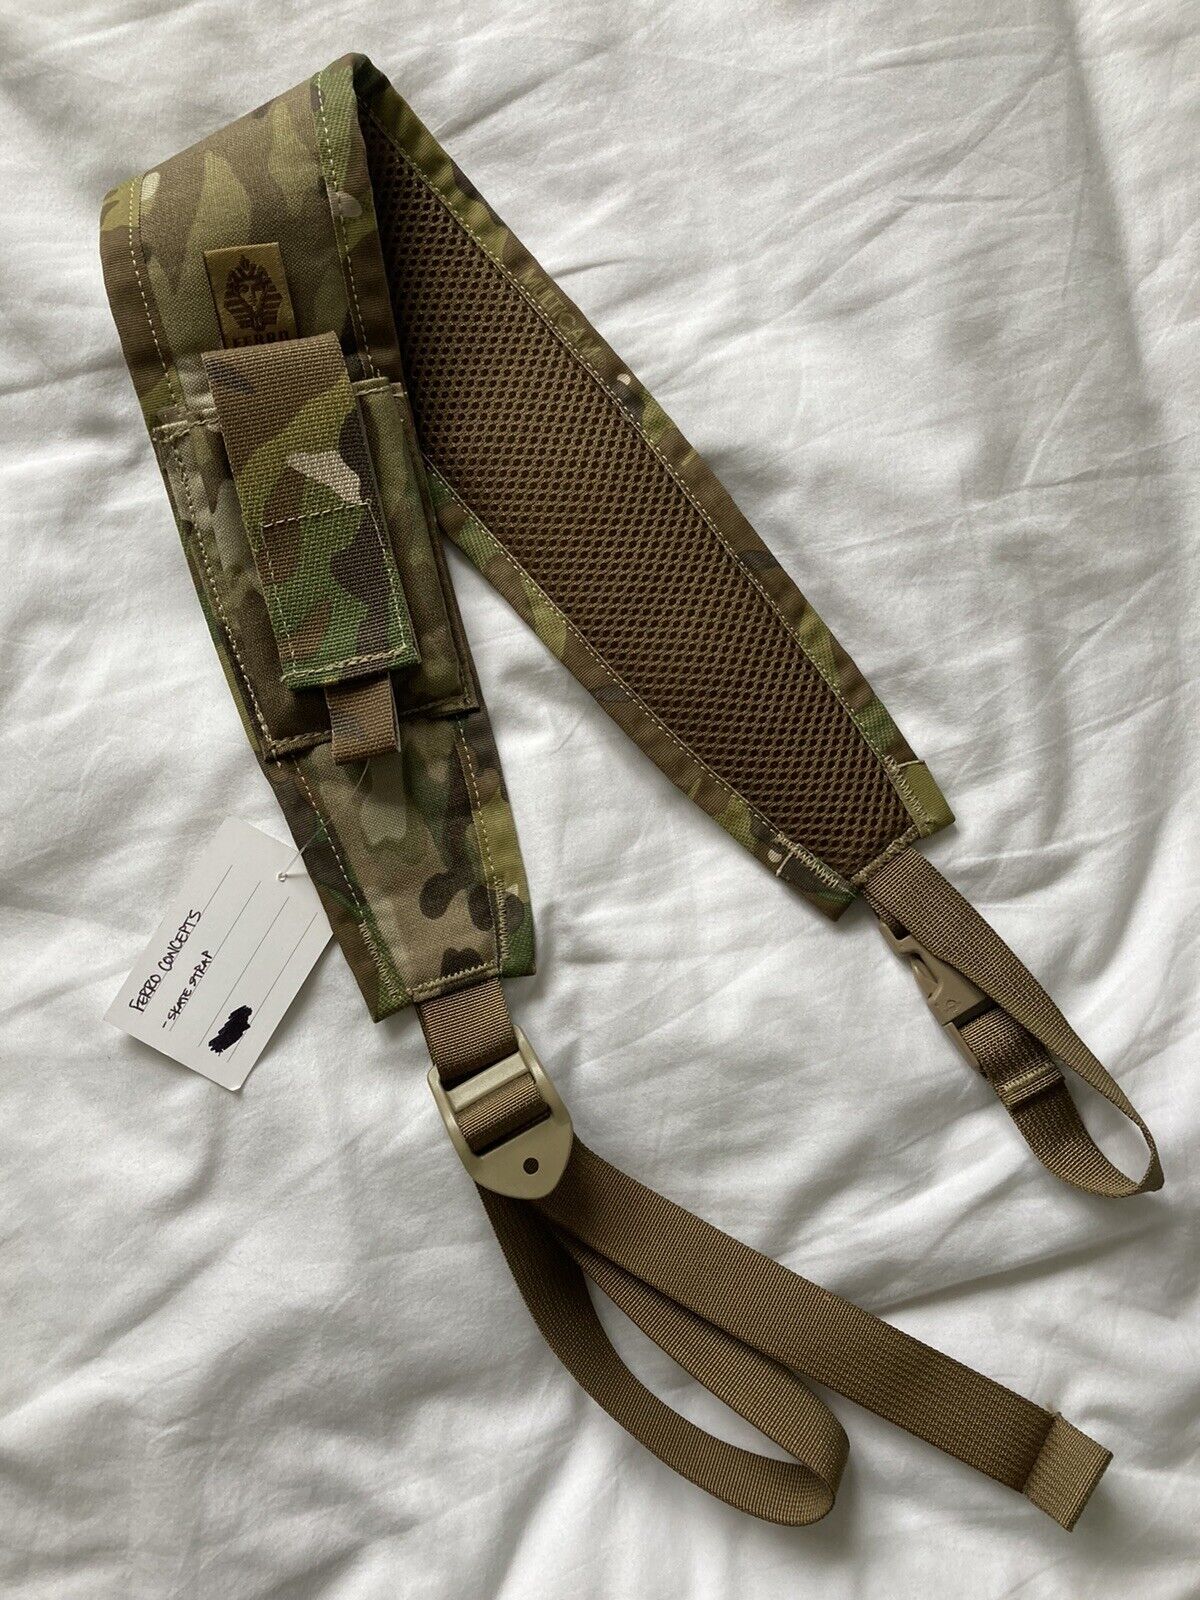 Ferro Concepts Slingster Weapons Sling (NEW)